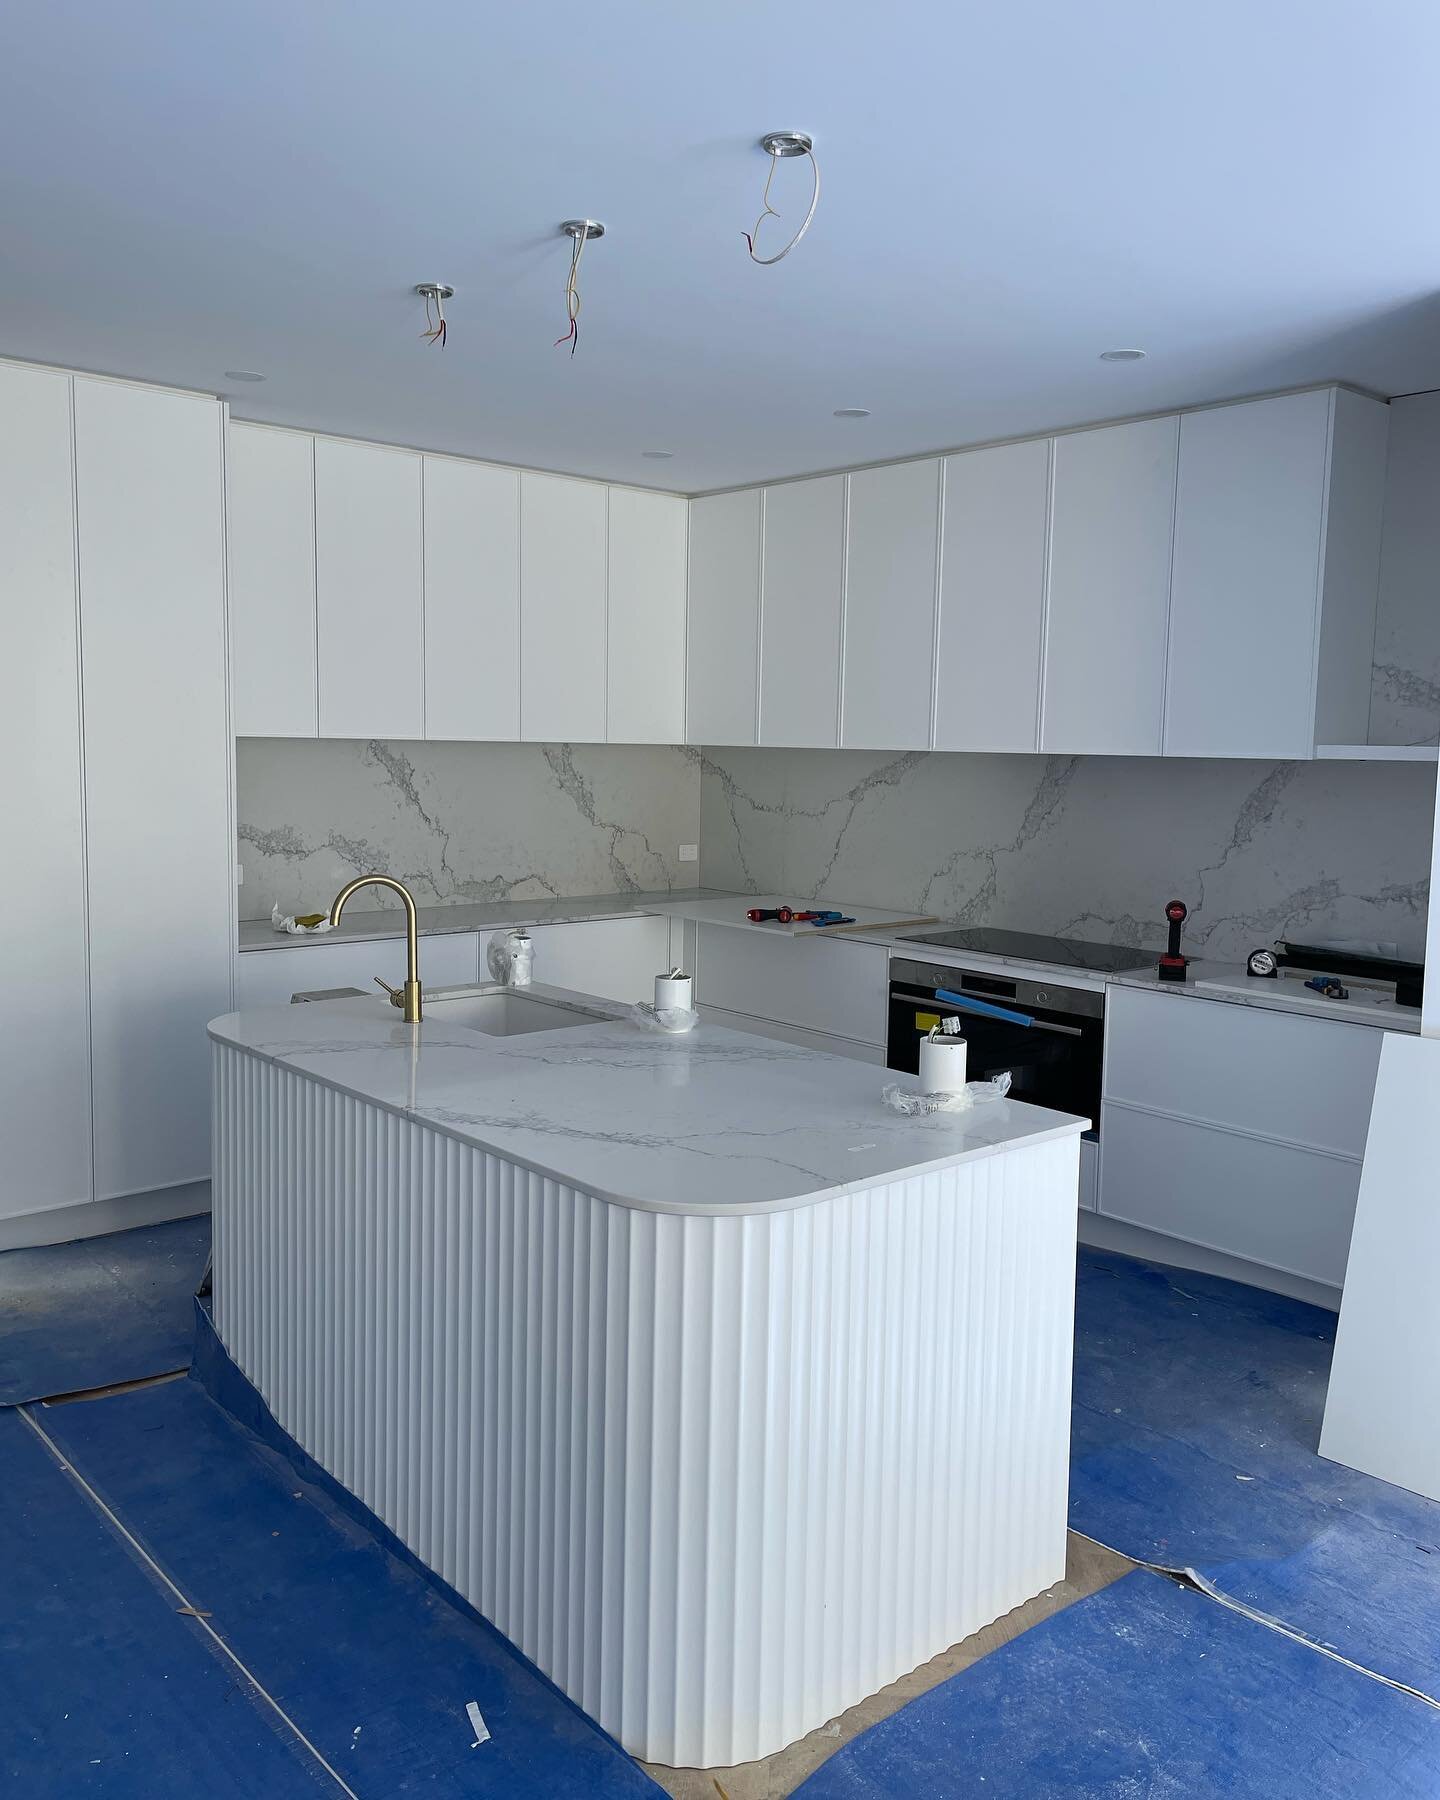 Fit off underway at our Moonee Ponds duplex.

Handover this week &amp; we can&rsquo;t wait to deliver the finished product!